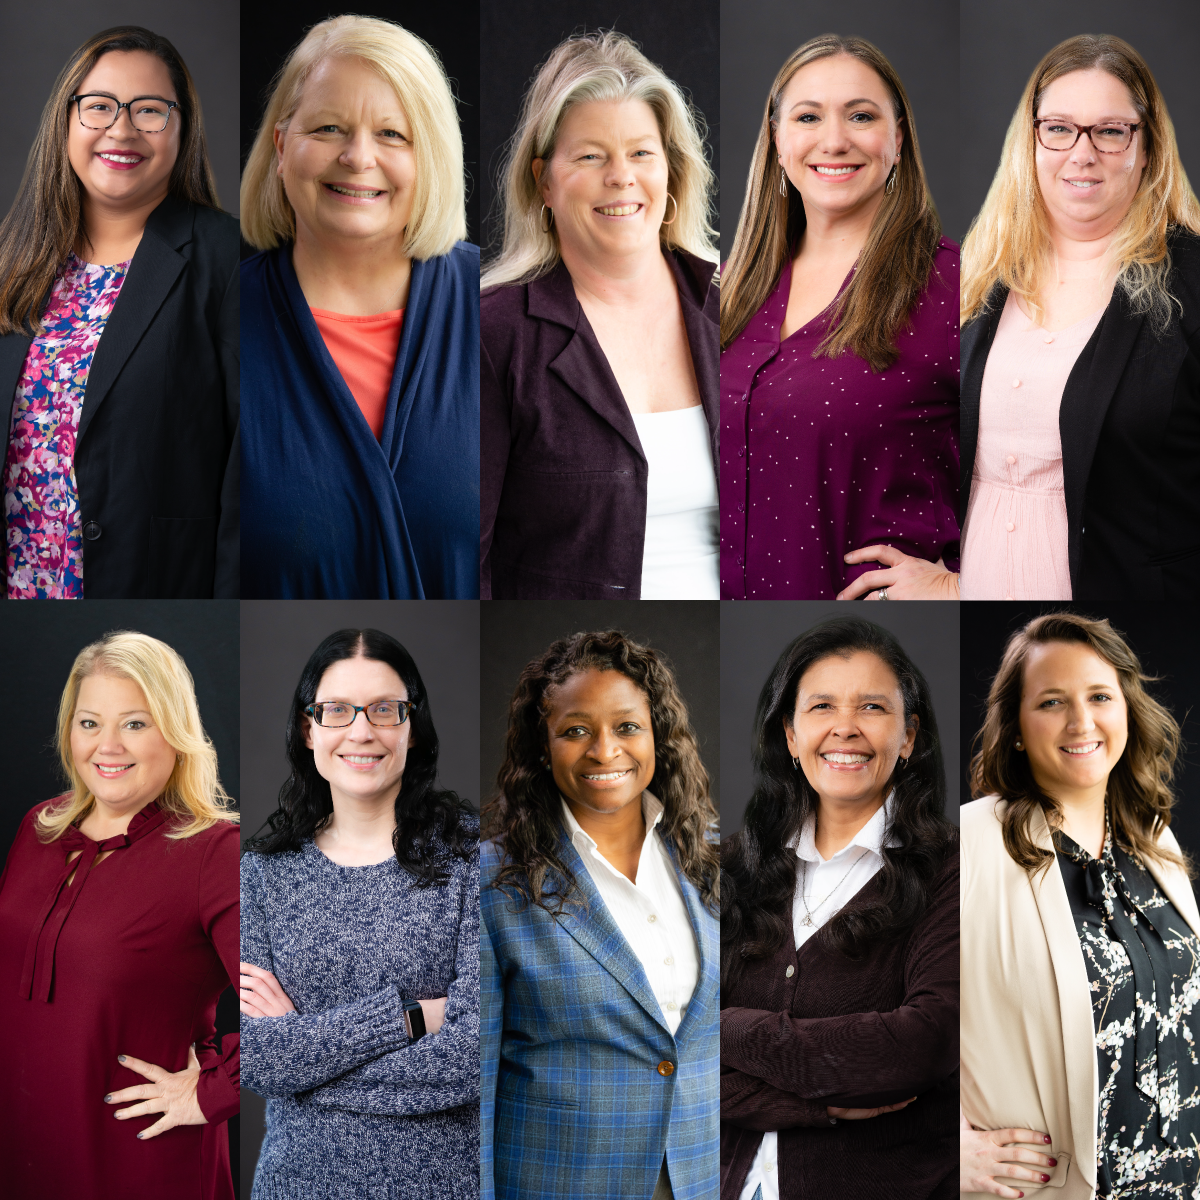 Collage of headshots of WB Moore women employees